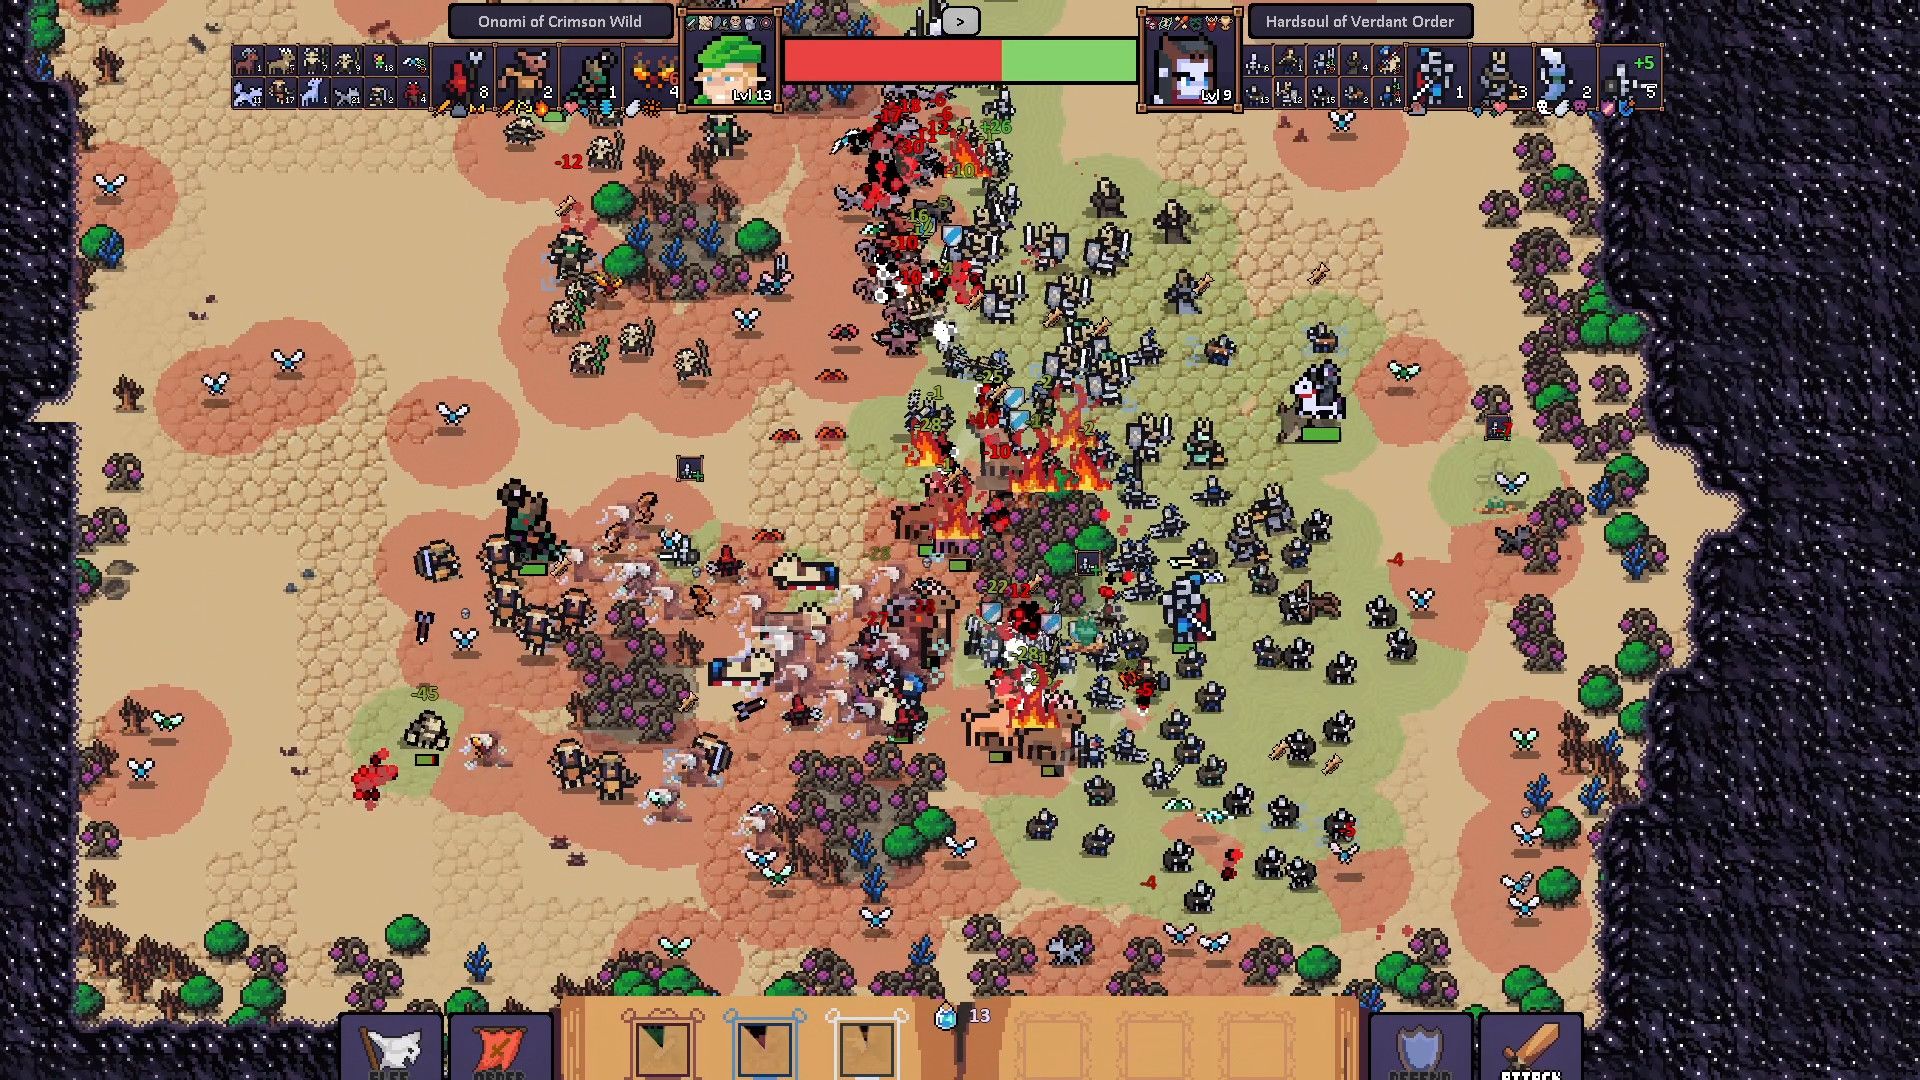 Hero's Hour Large battle between two powerful armies in a desert 